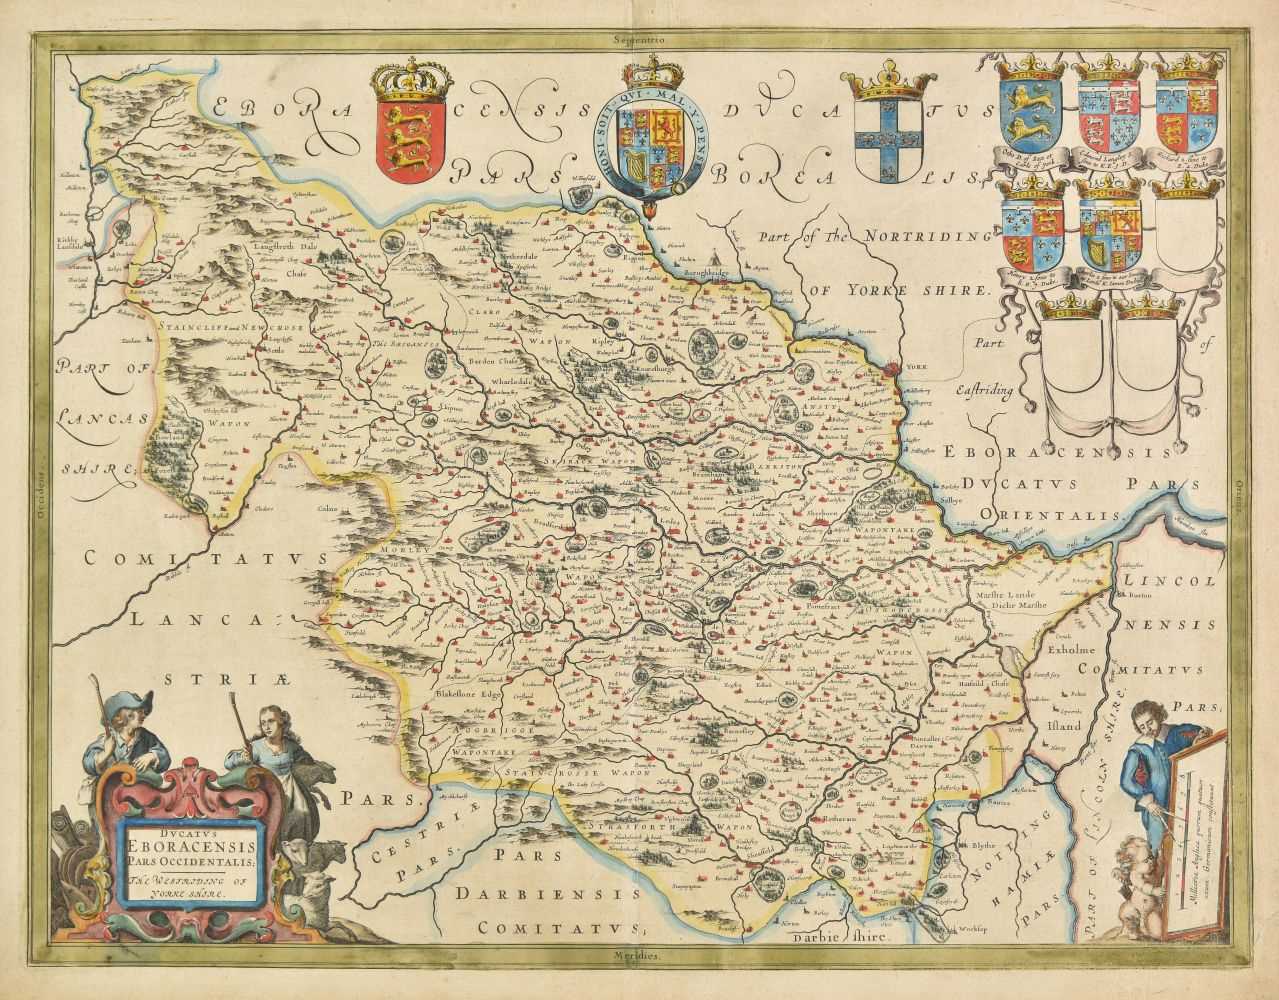 Lot 187 - Yorkshire. Blaeu (Johannes), c.1645 [and others]